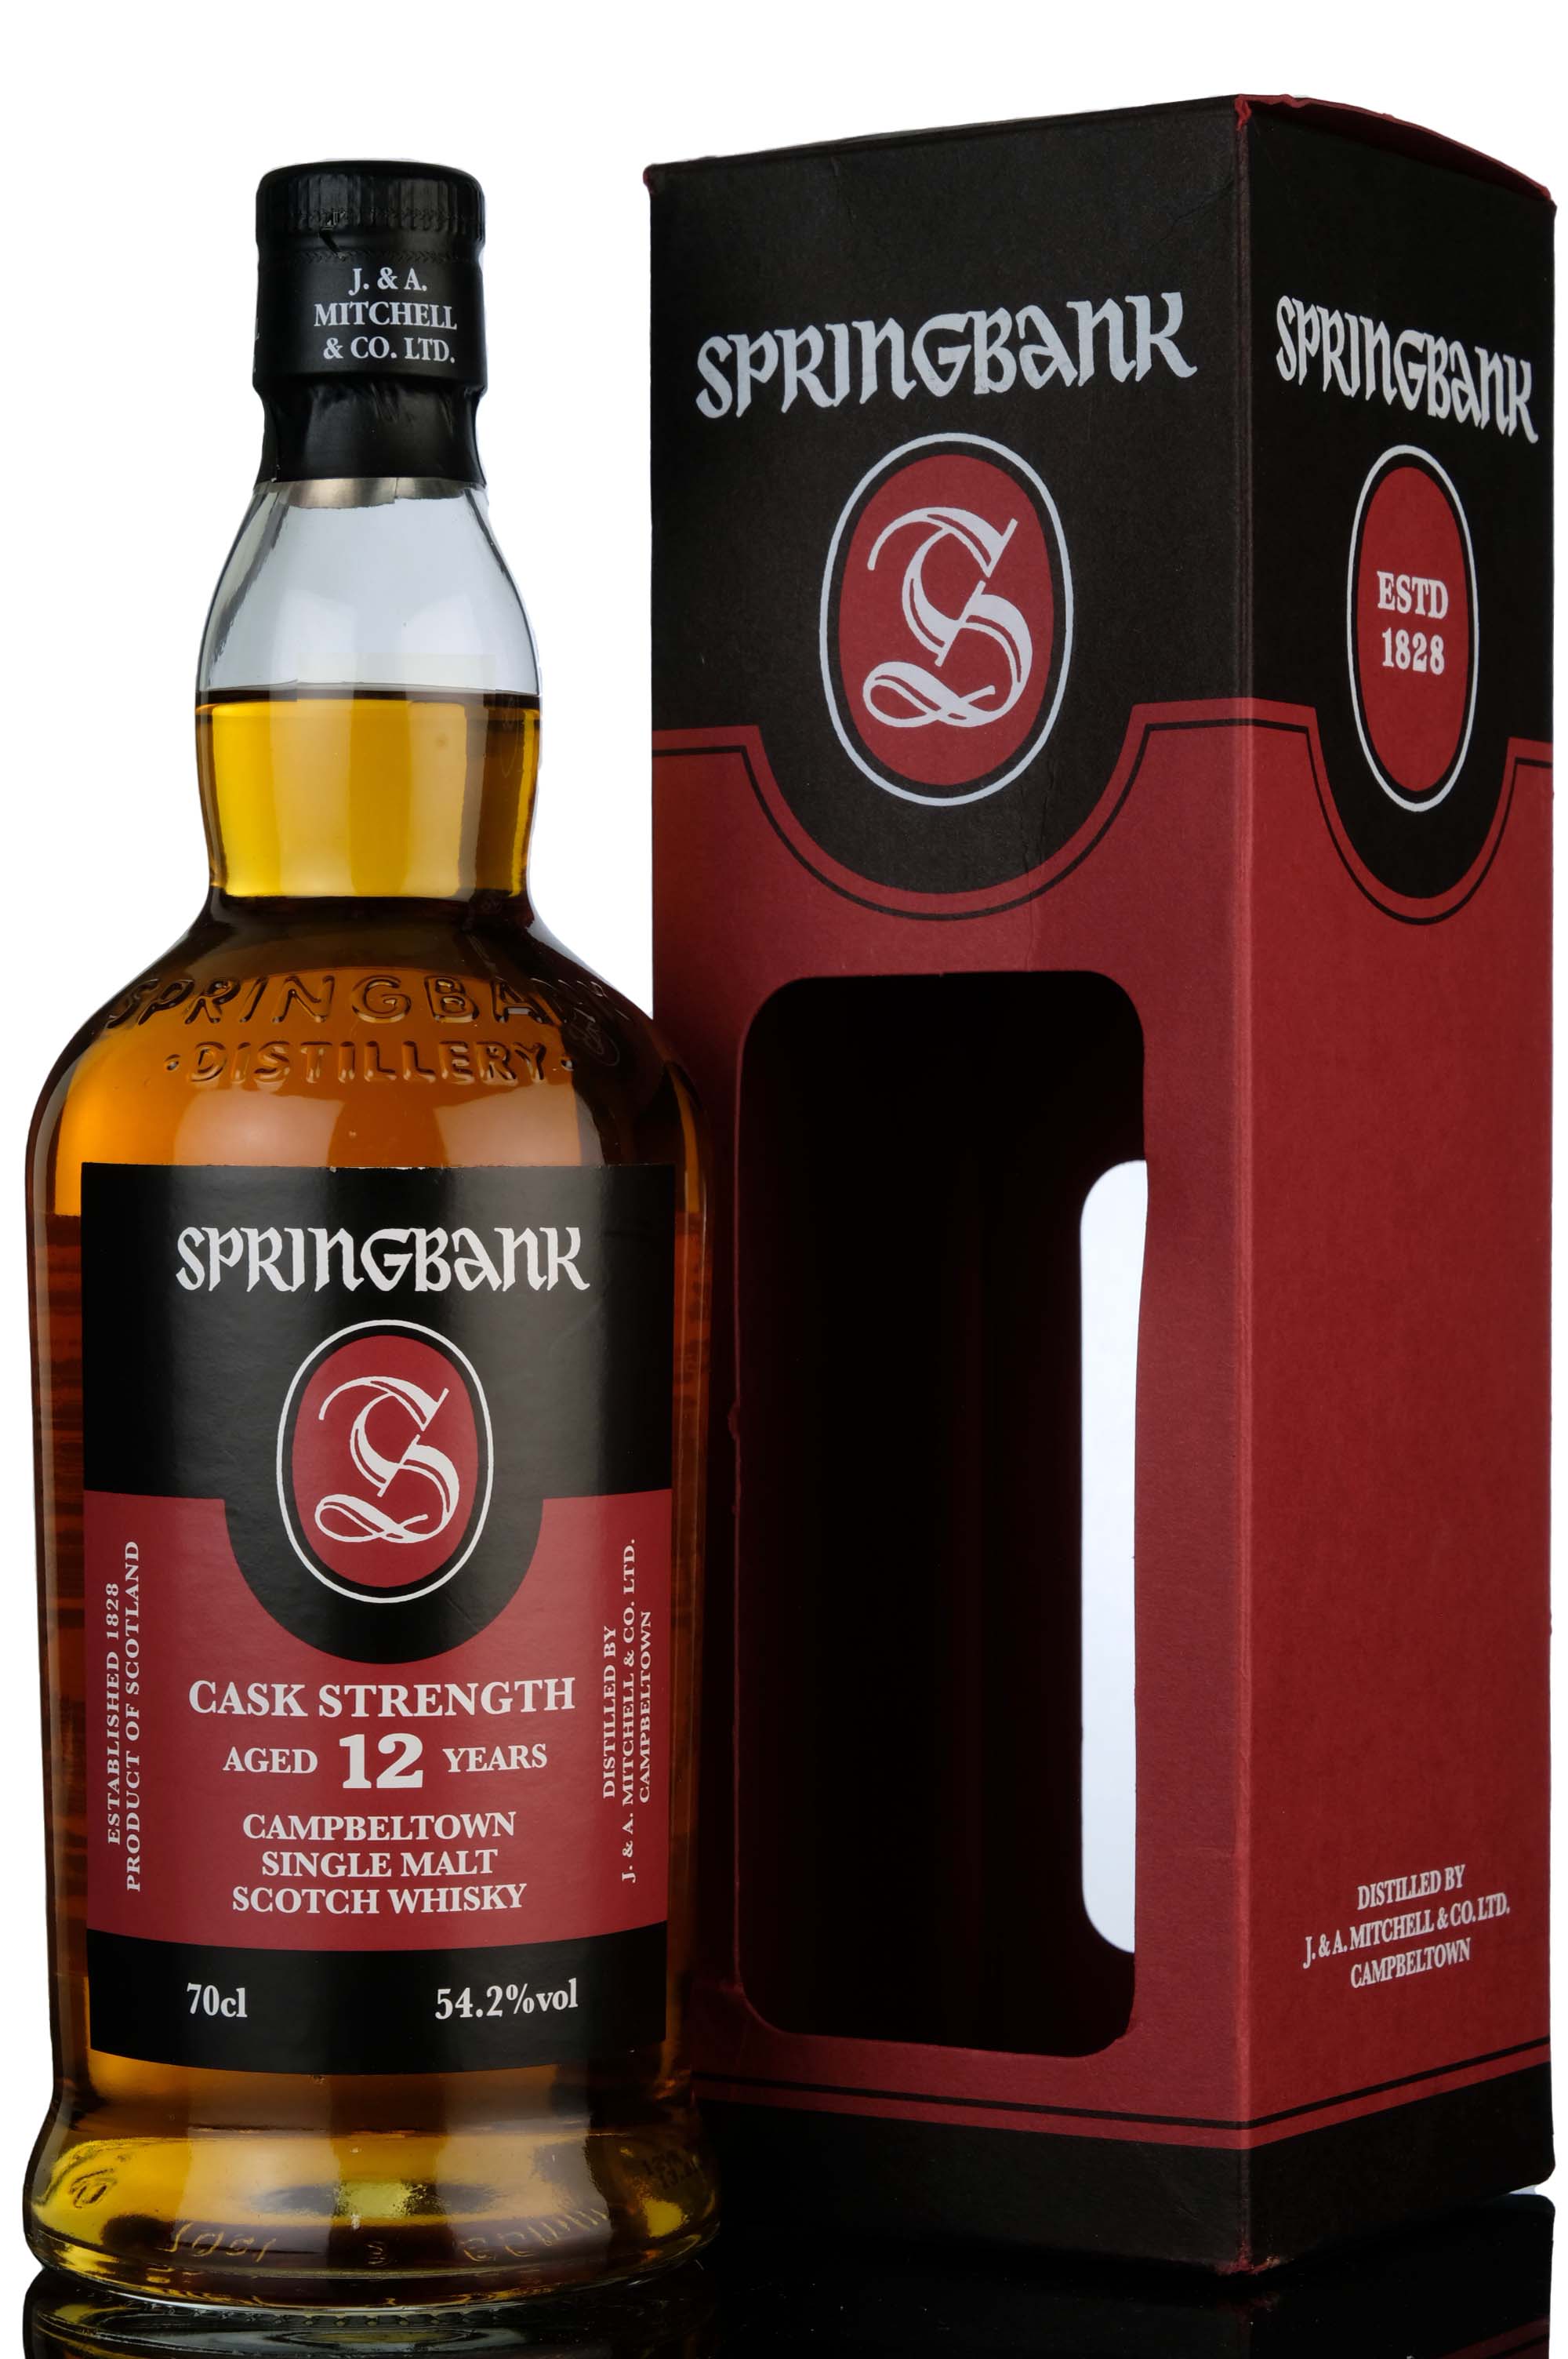 Springbank 12 Year Old - Cask Strength 54.2% - 2017 Release